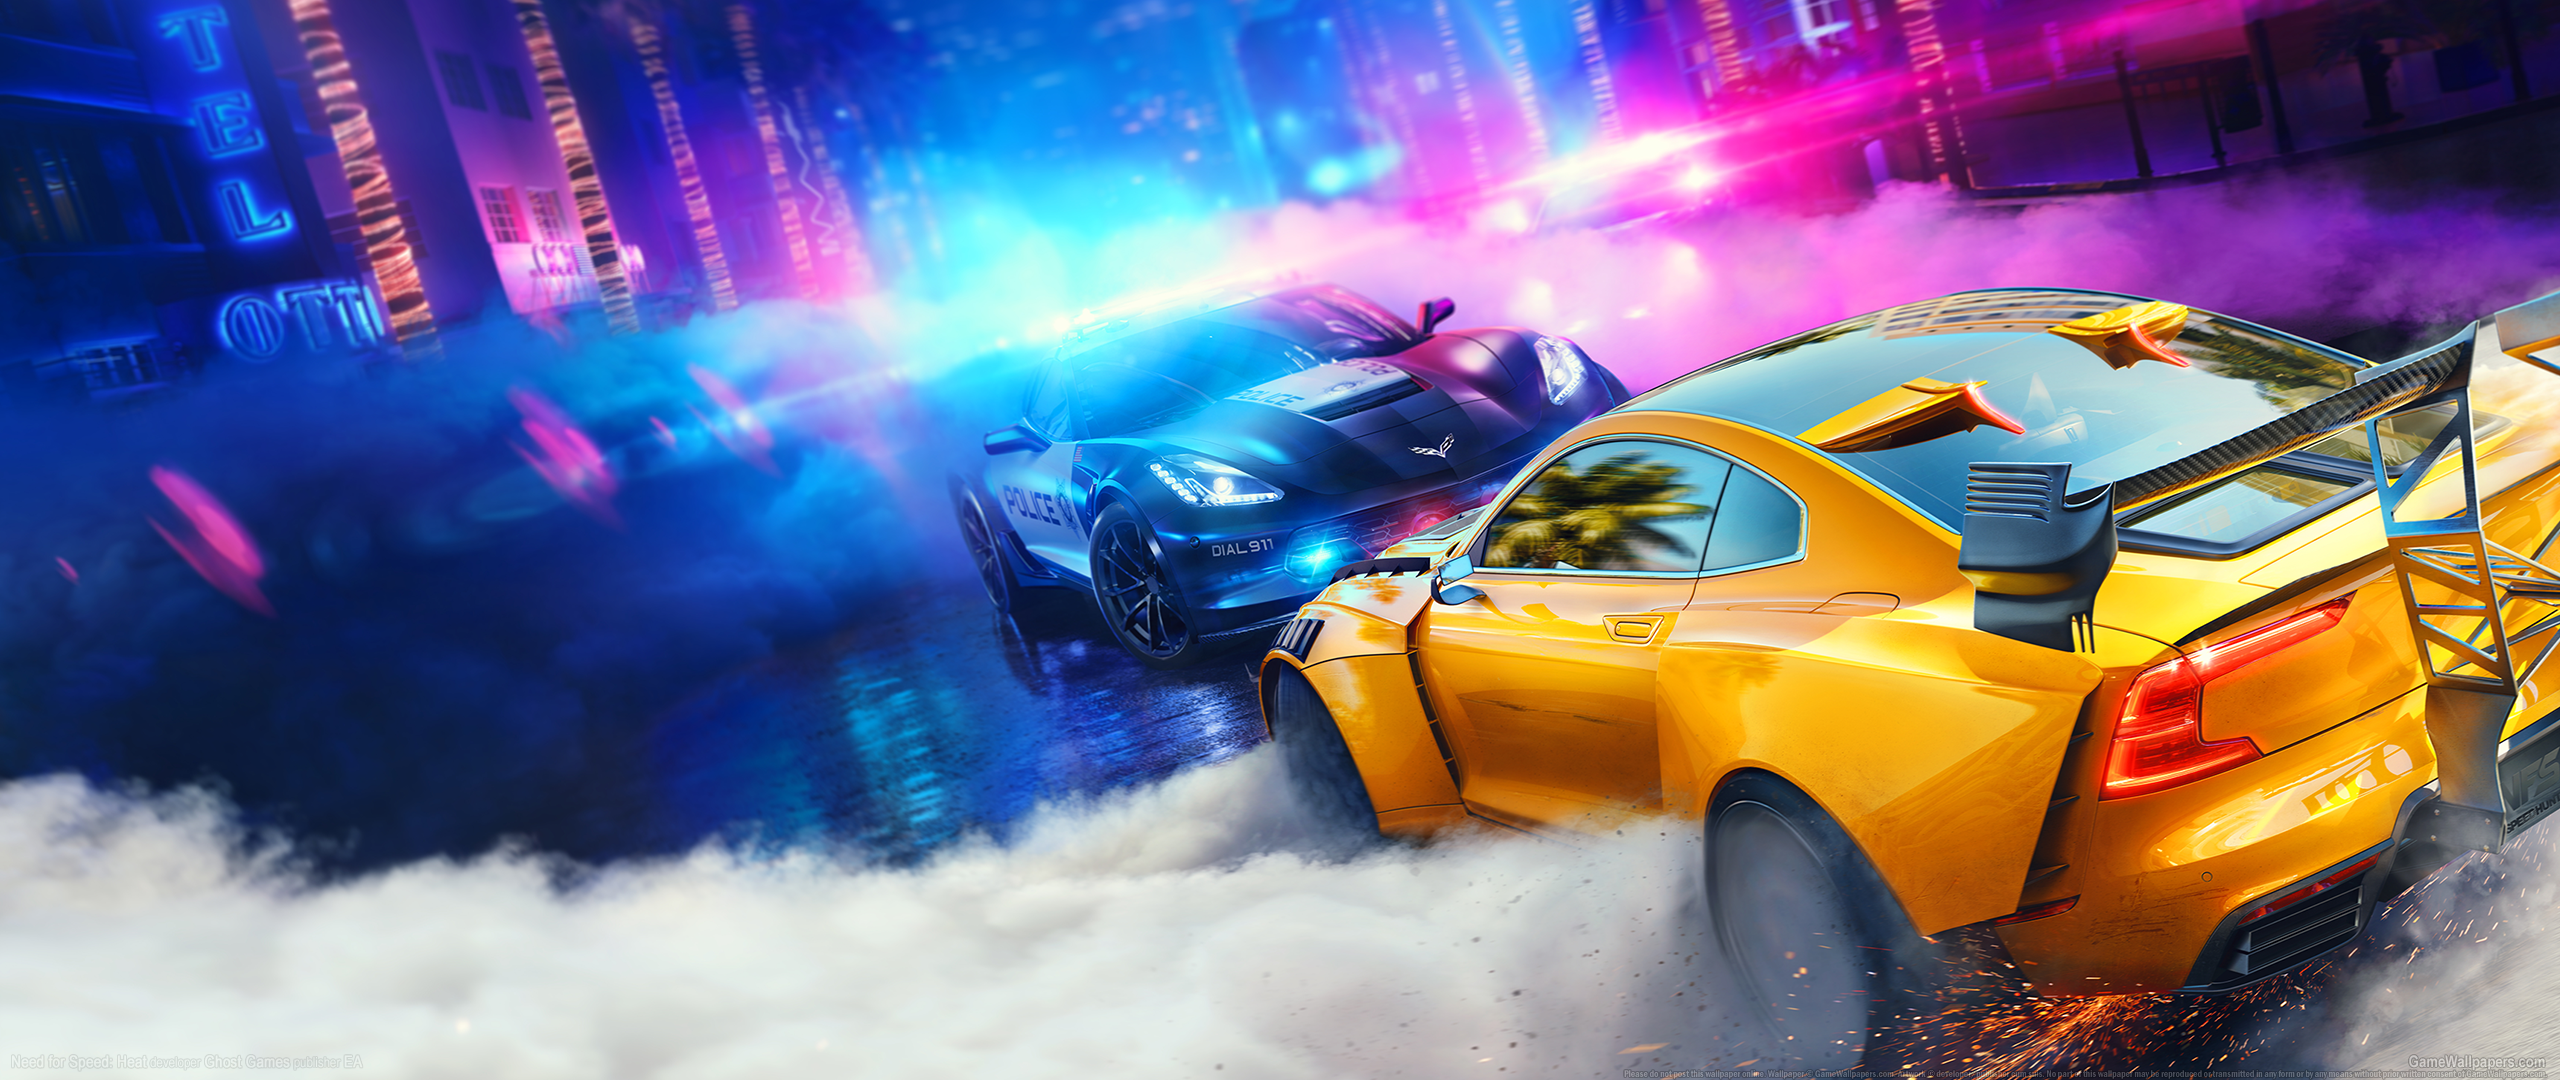 Need for Speed: Heat 2560x1080 wallpaper or background 01